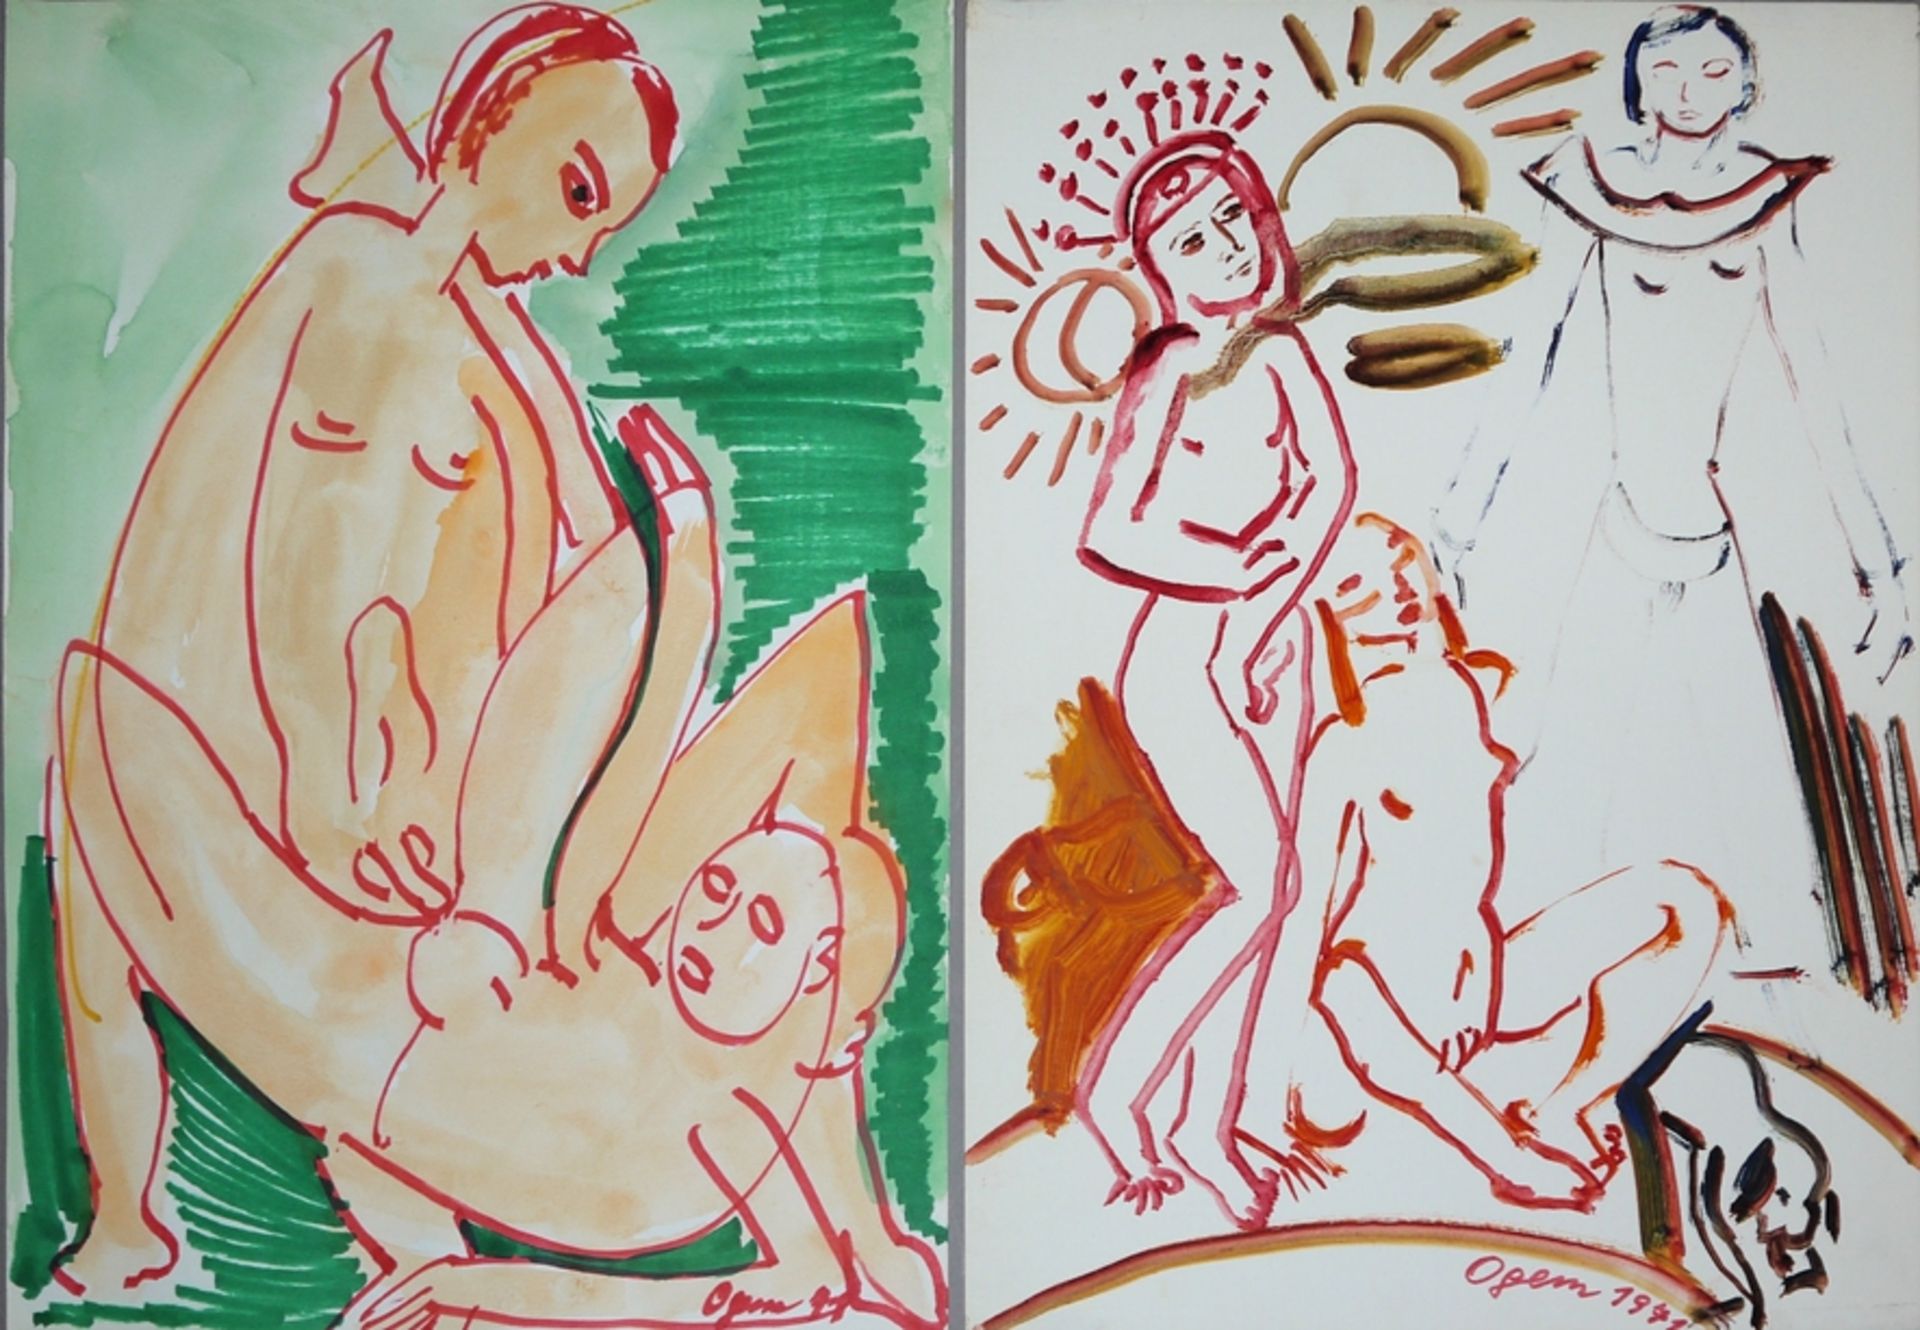 Getrud Ogem, Erotic Scenes, 4 signed watercolours from the 1970s - Image 2 of 2